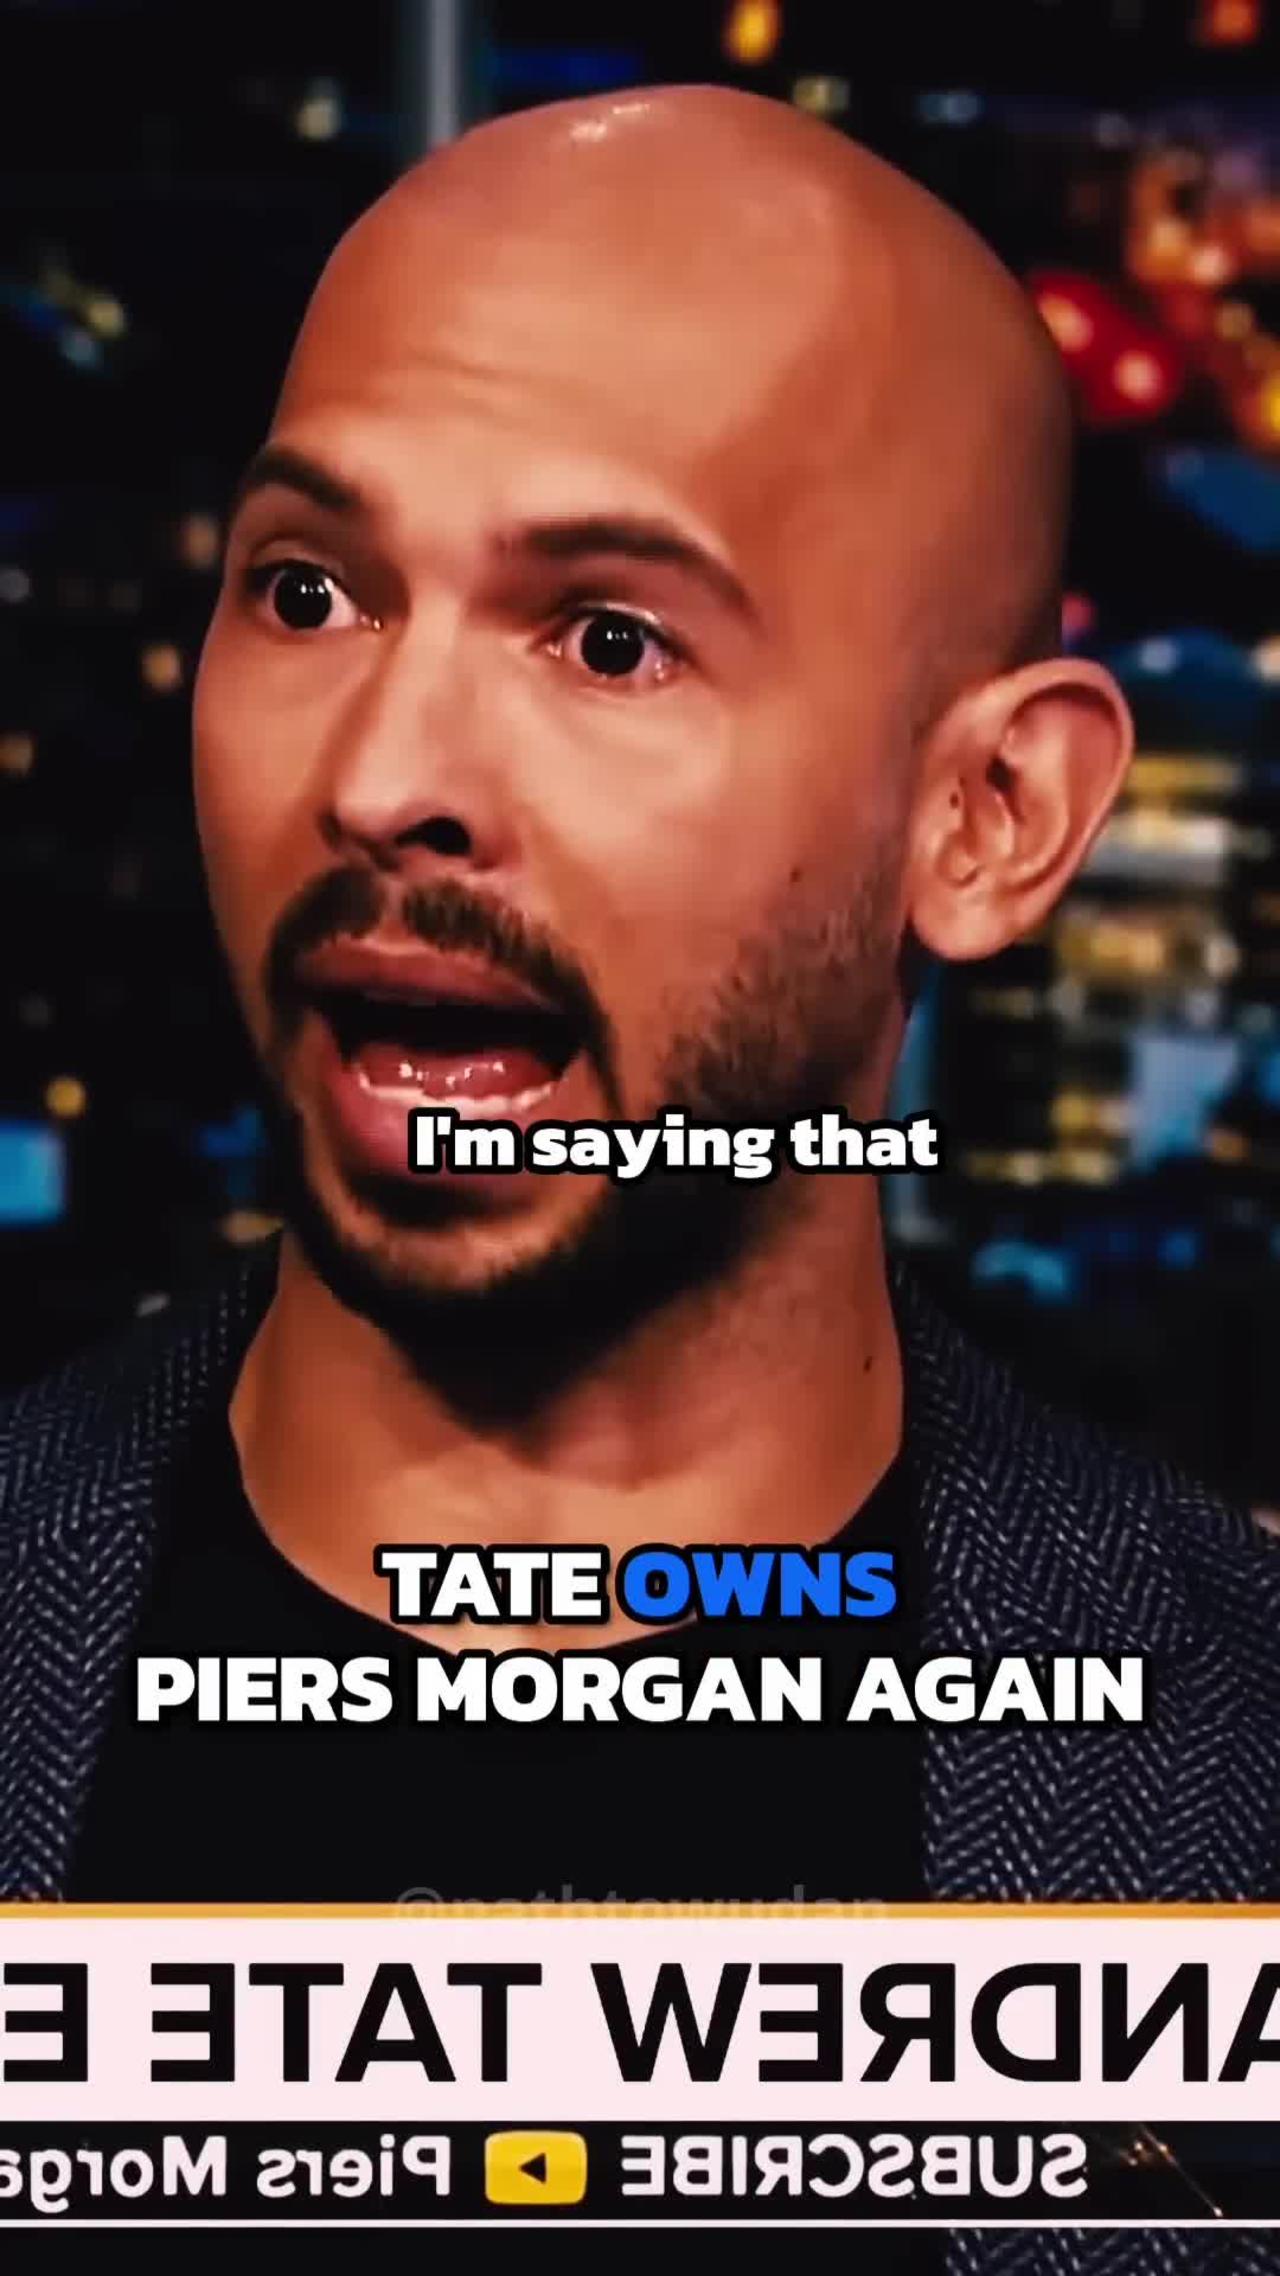 Andrew Tate owns Piers Morgan